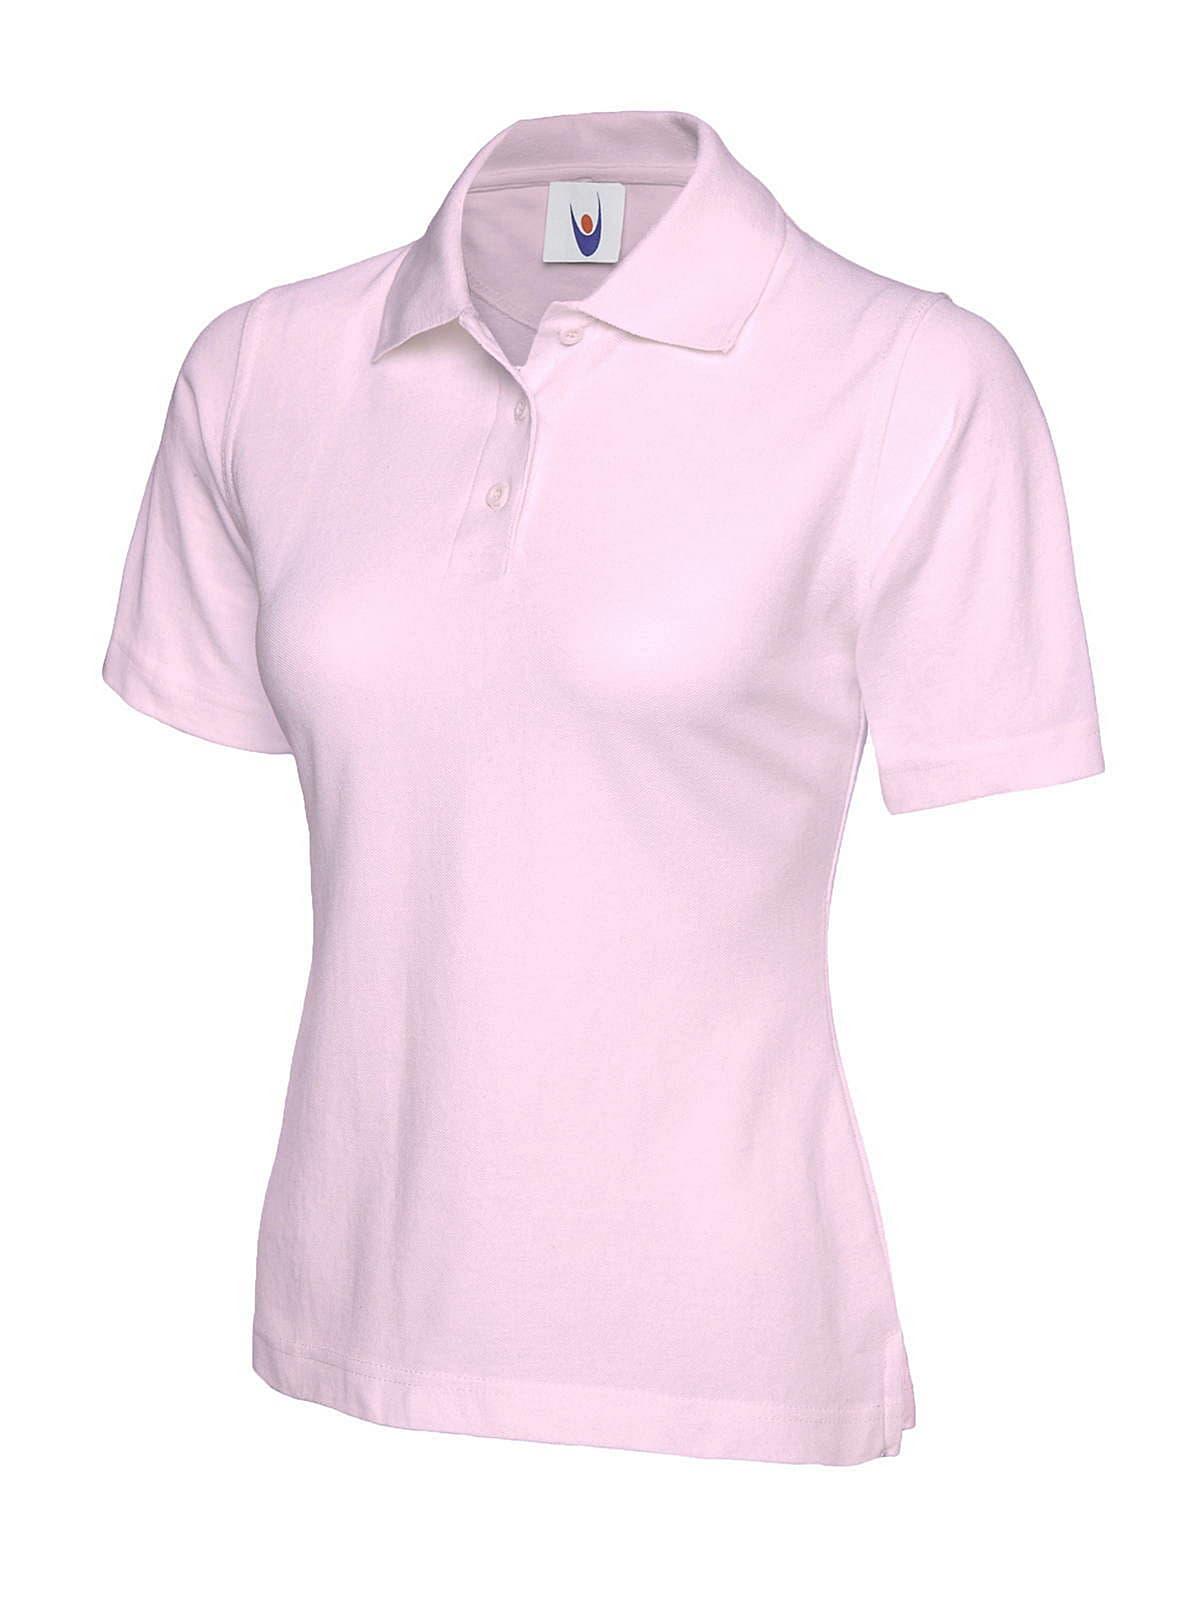 Uneek 220GSM Womens Polo Shirt in Pink (Product Code: UC106)